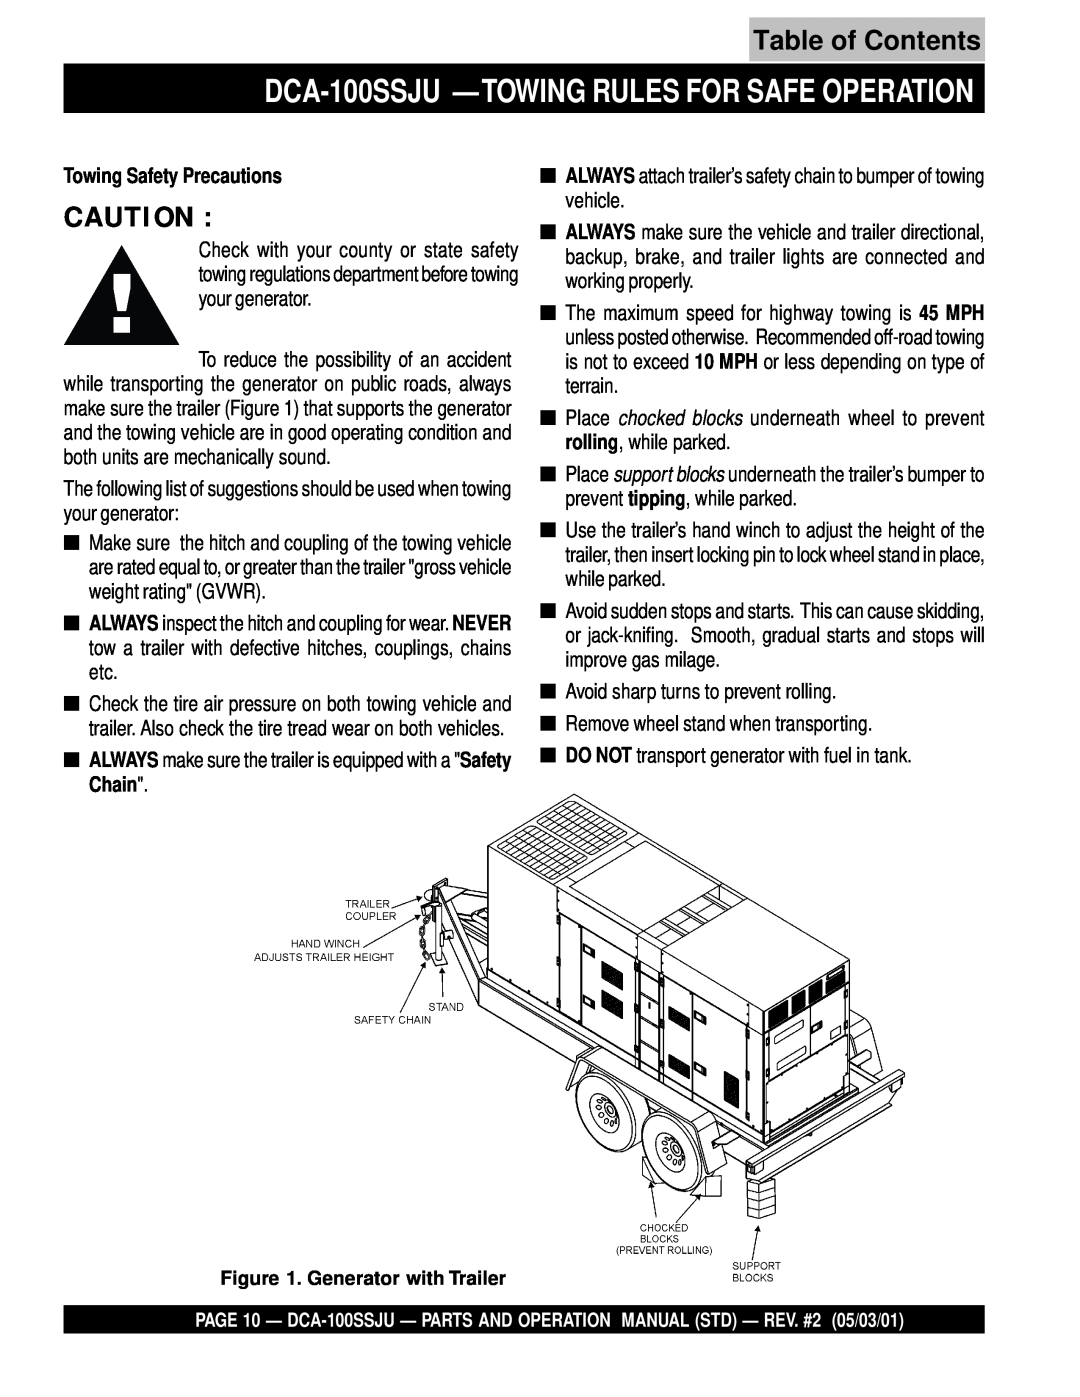 Multiquip operation manual DCA-100SSJU— TOWING RULES FOR SAFE OPERATION, Table of Contents, Towing Safety Precautions 